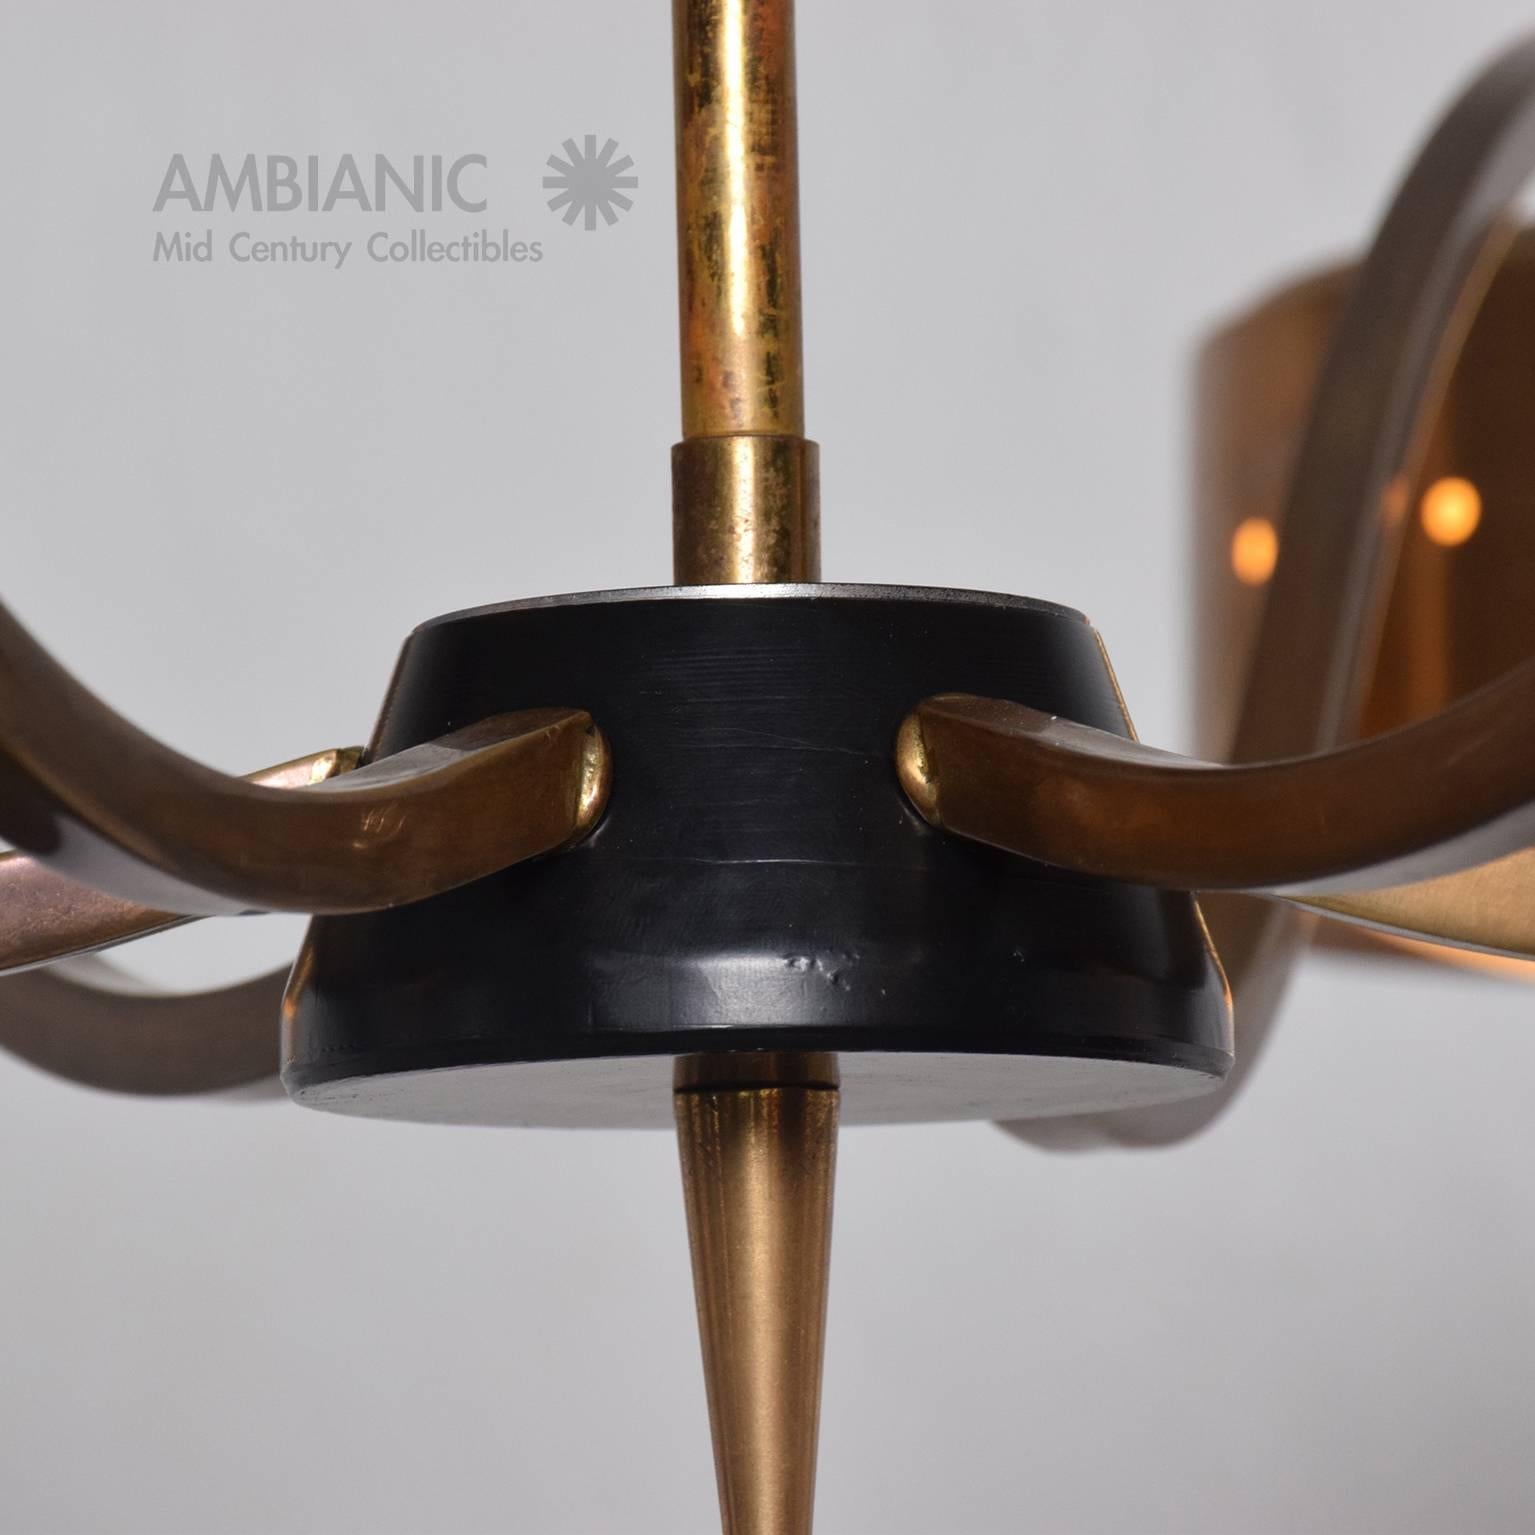 For your consideration a vintage chandelier with six arms. Sculptural shape in brass and anodized aluminum shades. Original vintage glass diffusers in good shape.


Rewired and ready to go. 

28